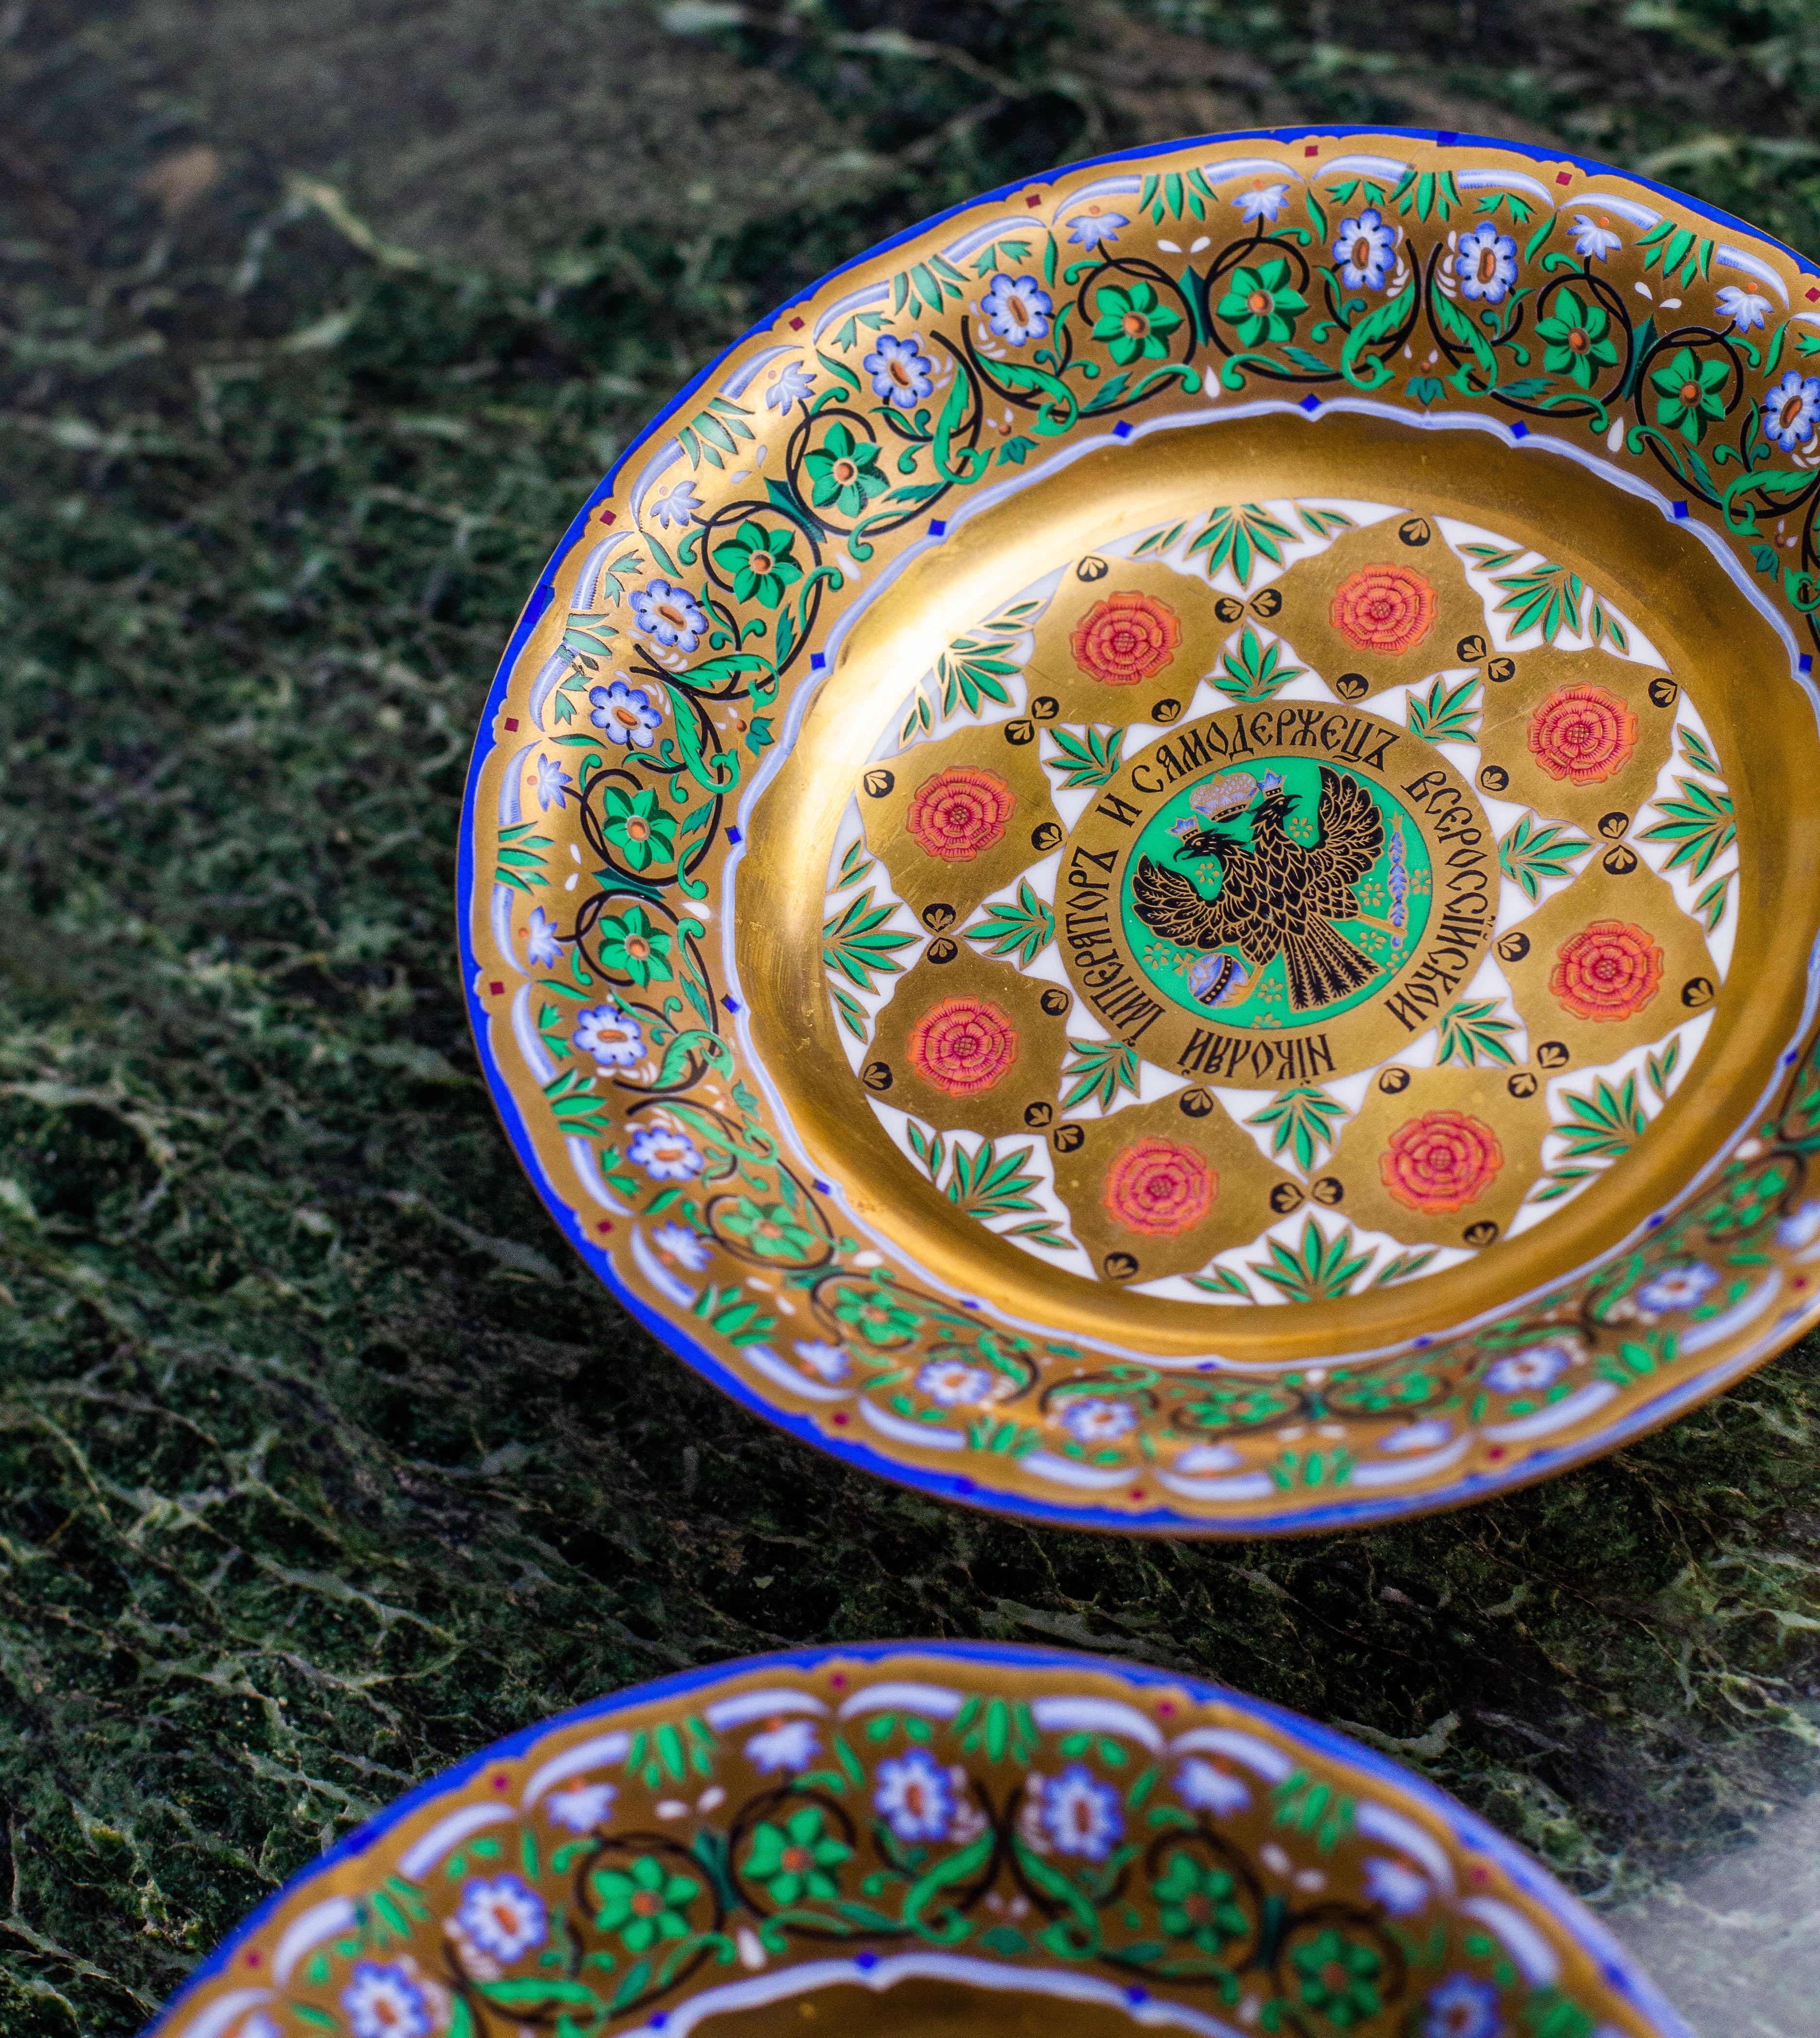 Commissioned by Nicholas I for the Grand Kremlin Palace in Moscow, these Kremlin Service compotes are a striking example of Russia's Imperial age. Designed by Fedor Solntsev and produced by Imperial Porcelain Factory St. Petersburg, these dishes are